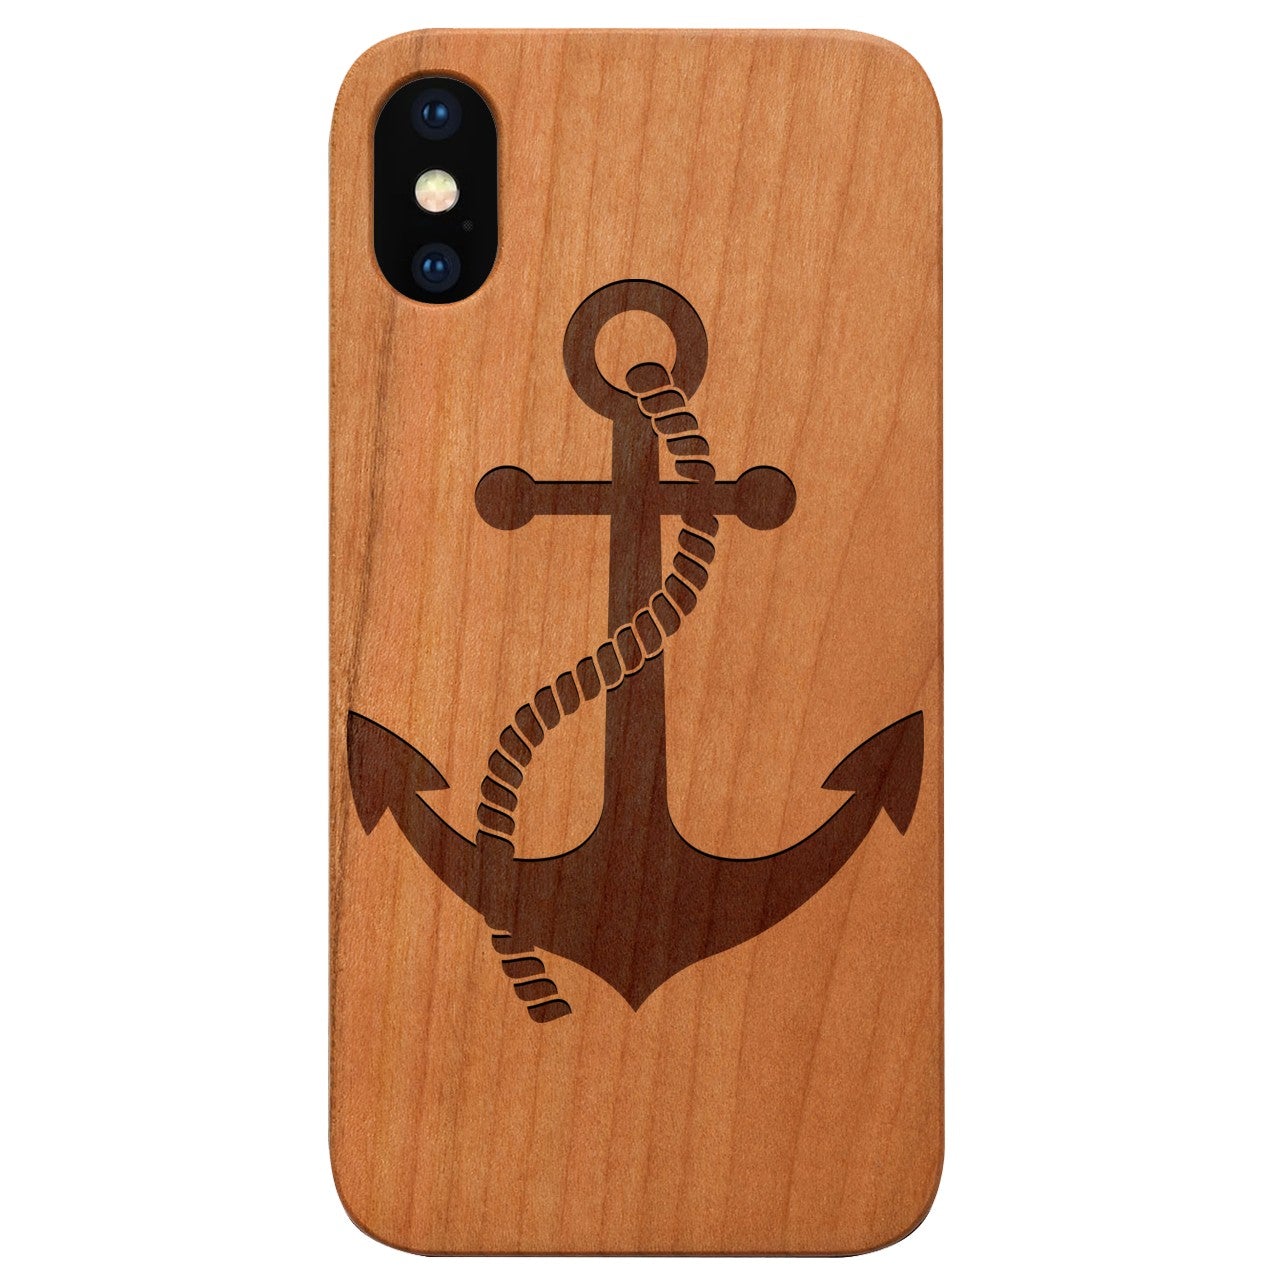  Anchor 2 - Engraved - Wooden Phone Case - IPhone 13 Models